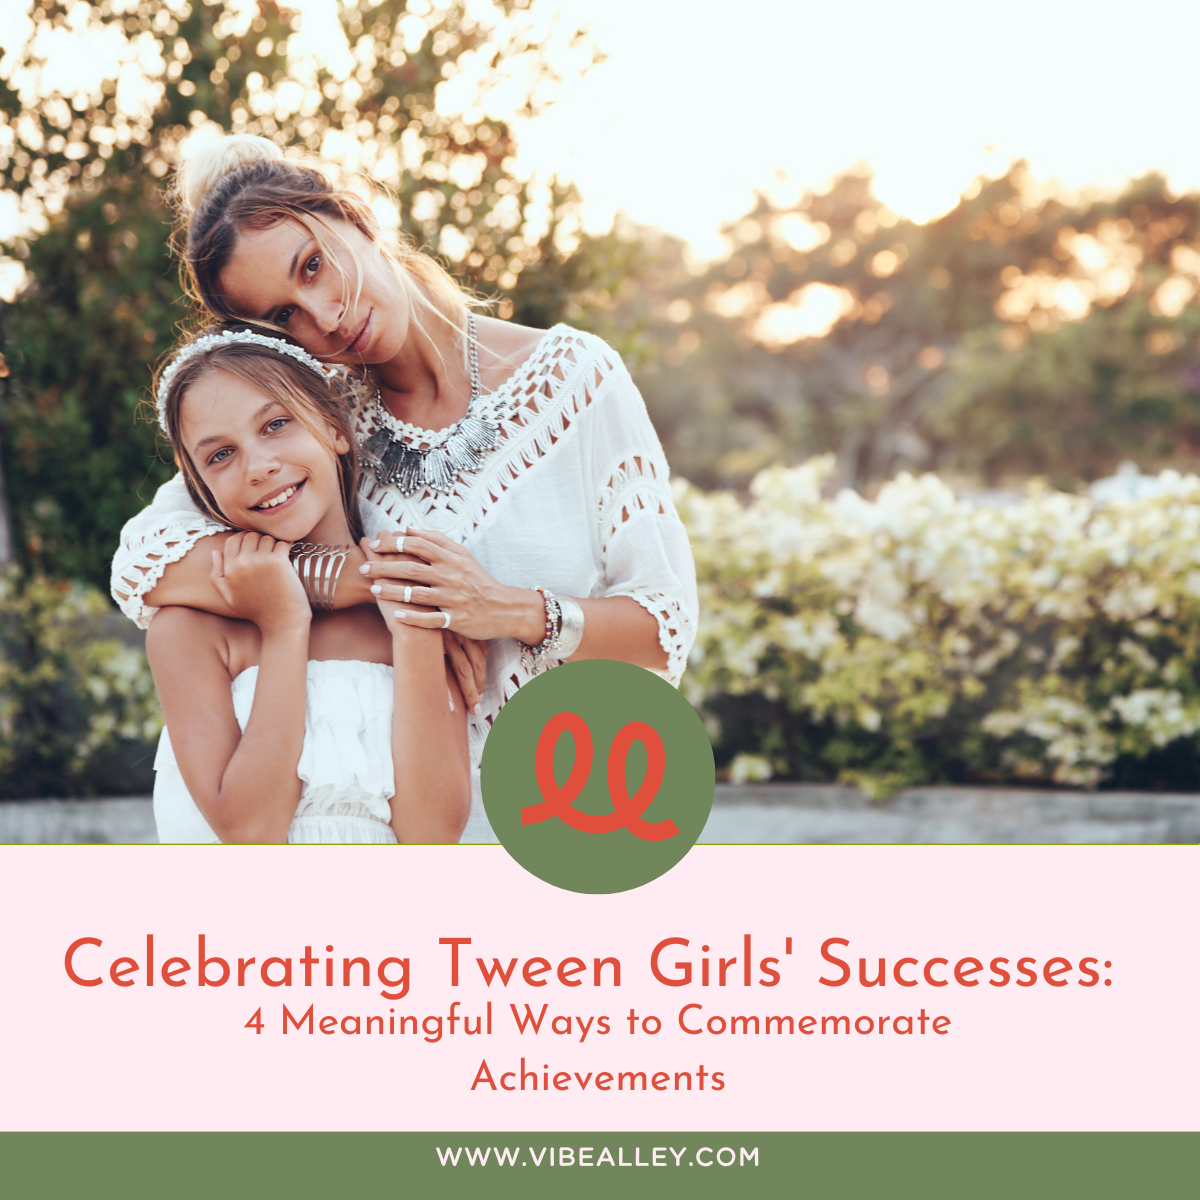 Celebrating Tween Girls' Successes: 4 Meaningful Ways to Commemorate Achievements